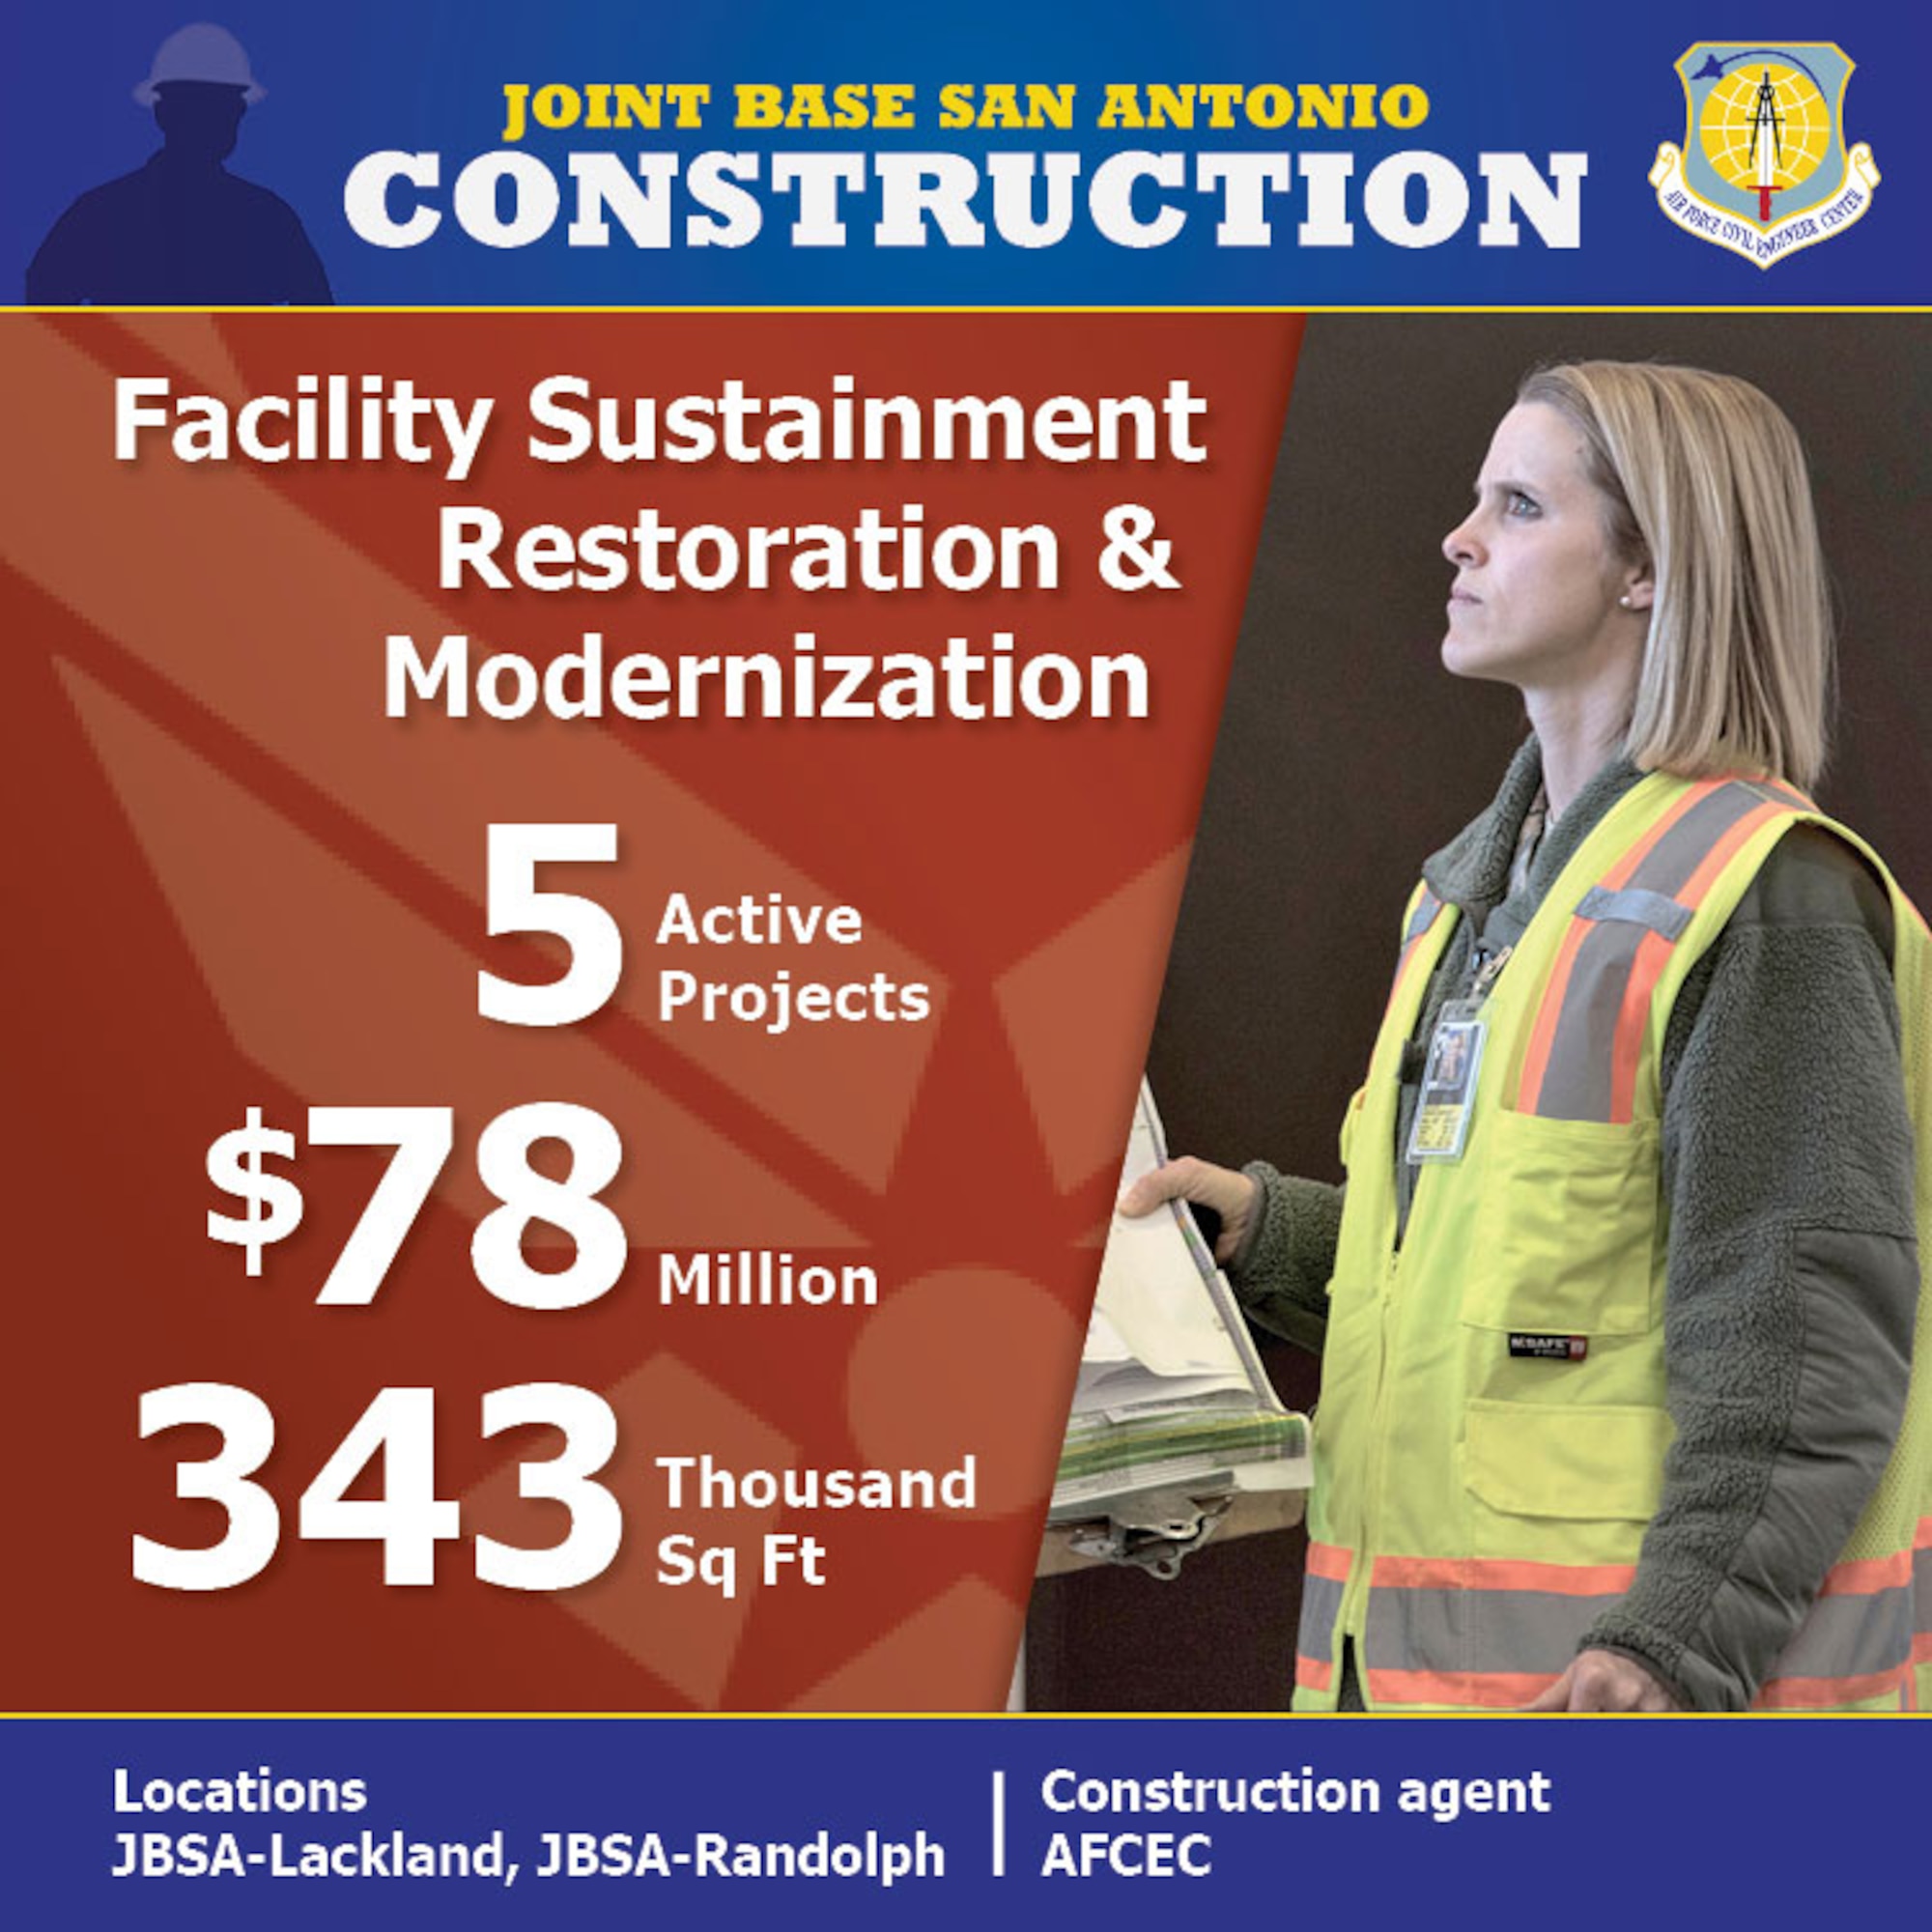 Graphic for construction efforts at JBSA Lackland and Randolph.